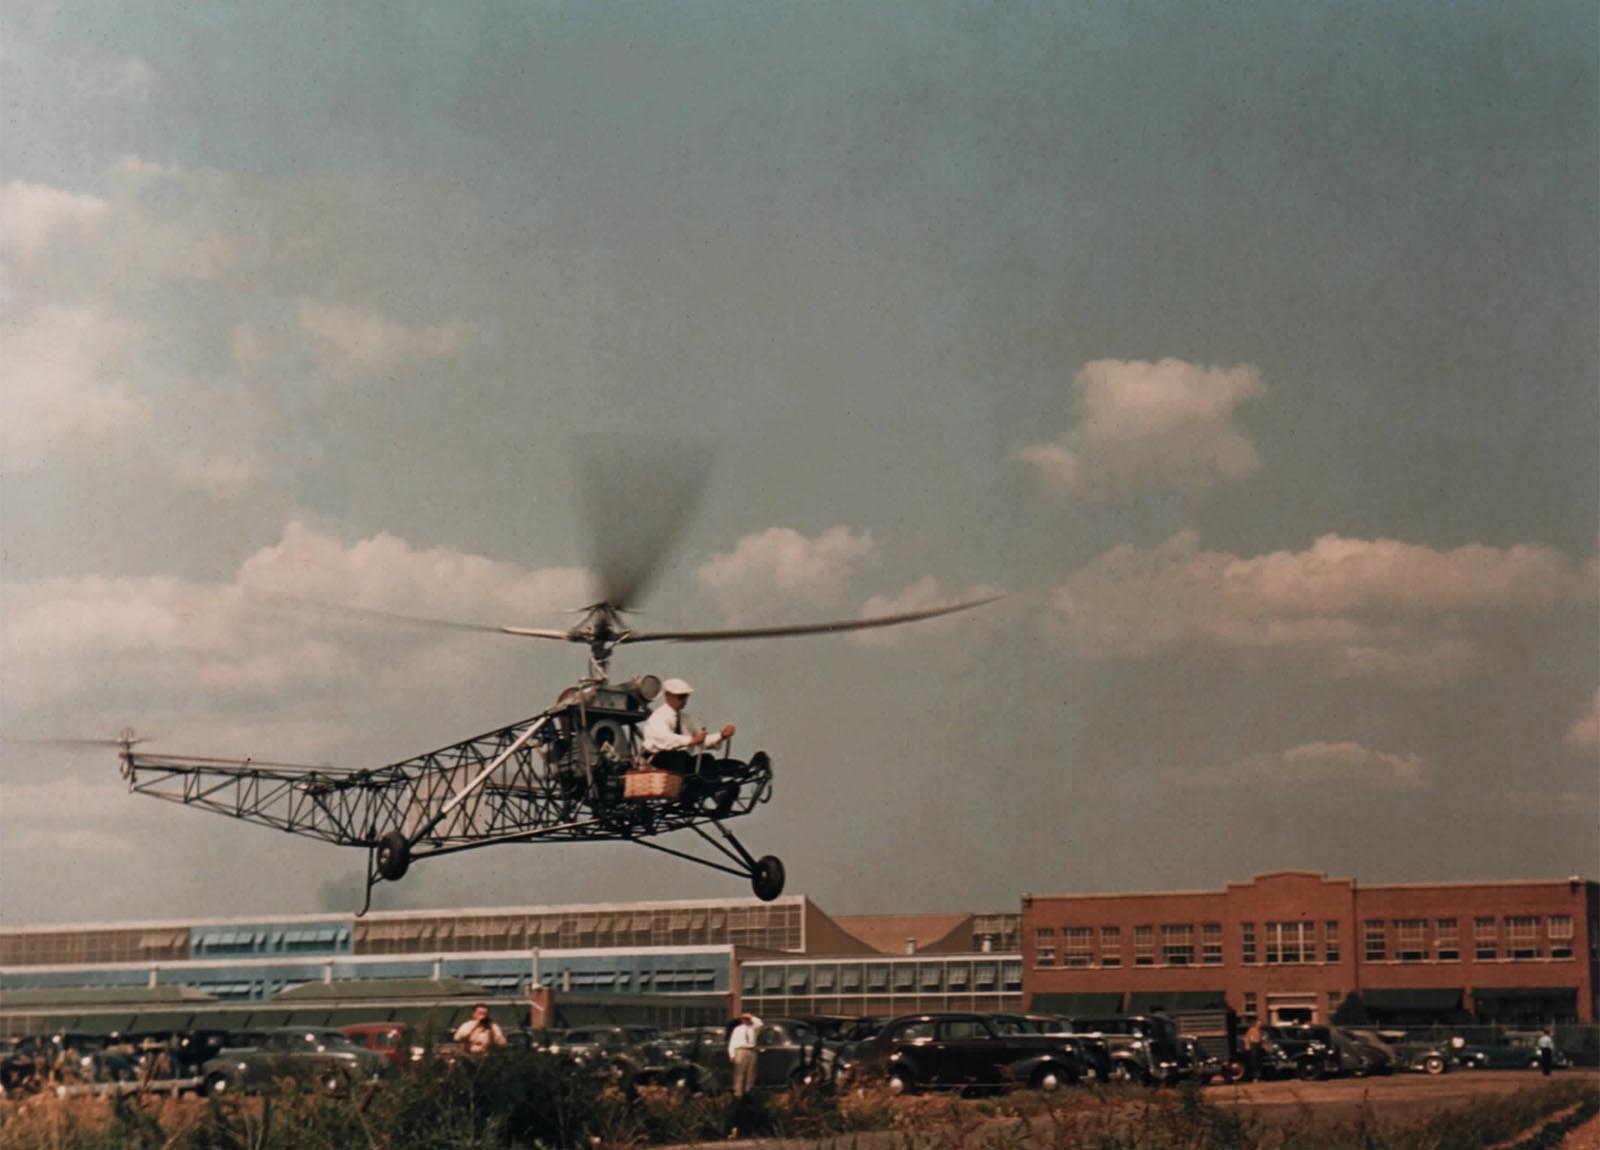 A rare color photo of Igor Sikorsky in the VS-300 hovering over meadow across from the factory.